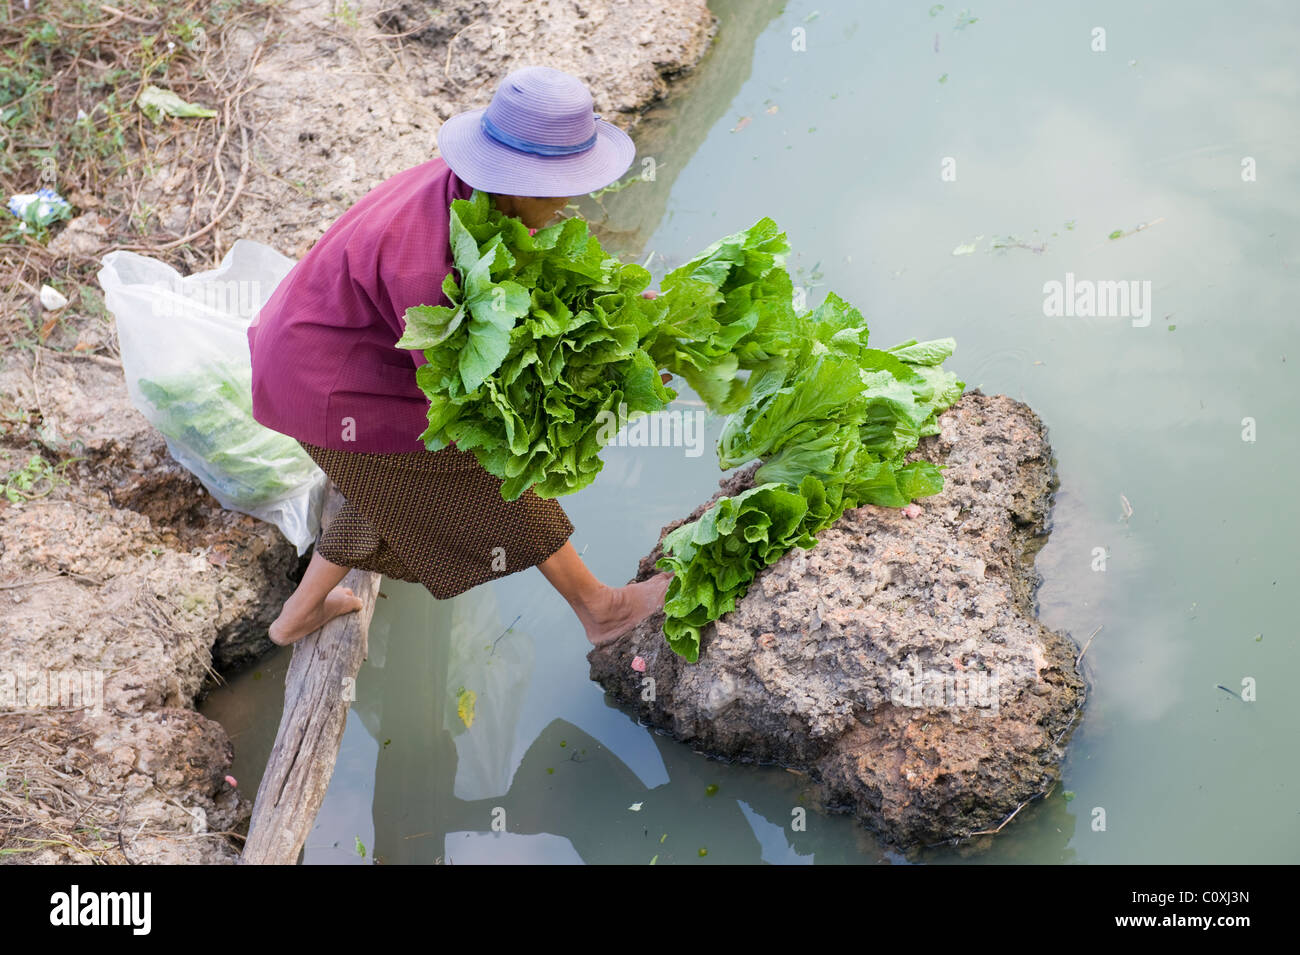 A poor rural farmer washing lettuce before taking it to sell at the local market. Stock Photo